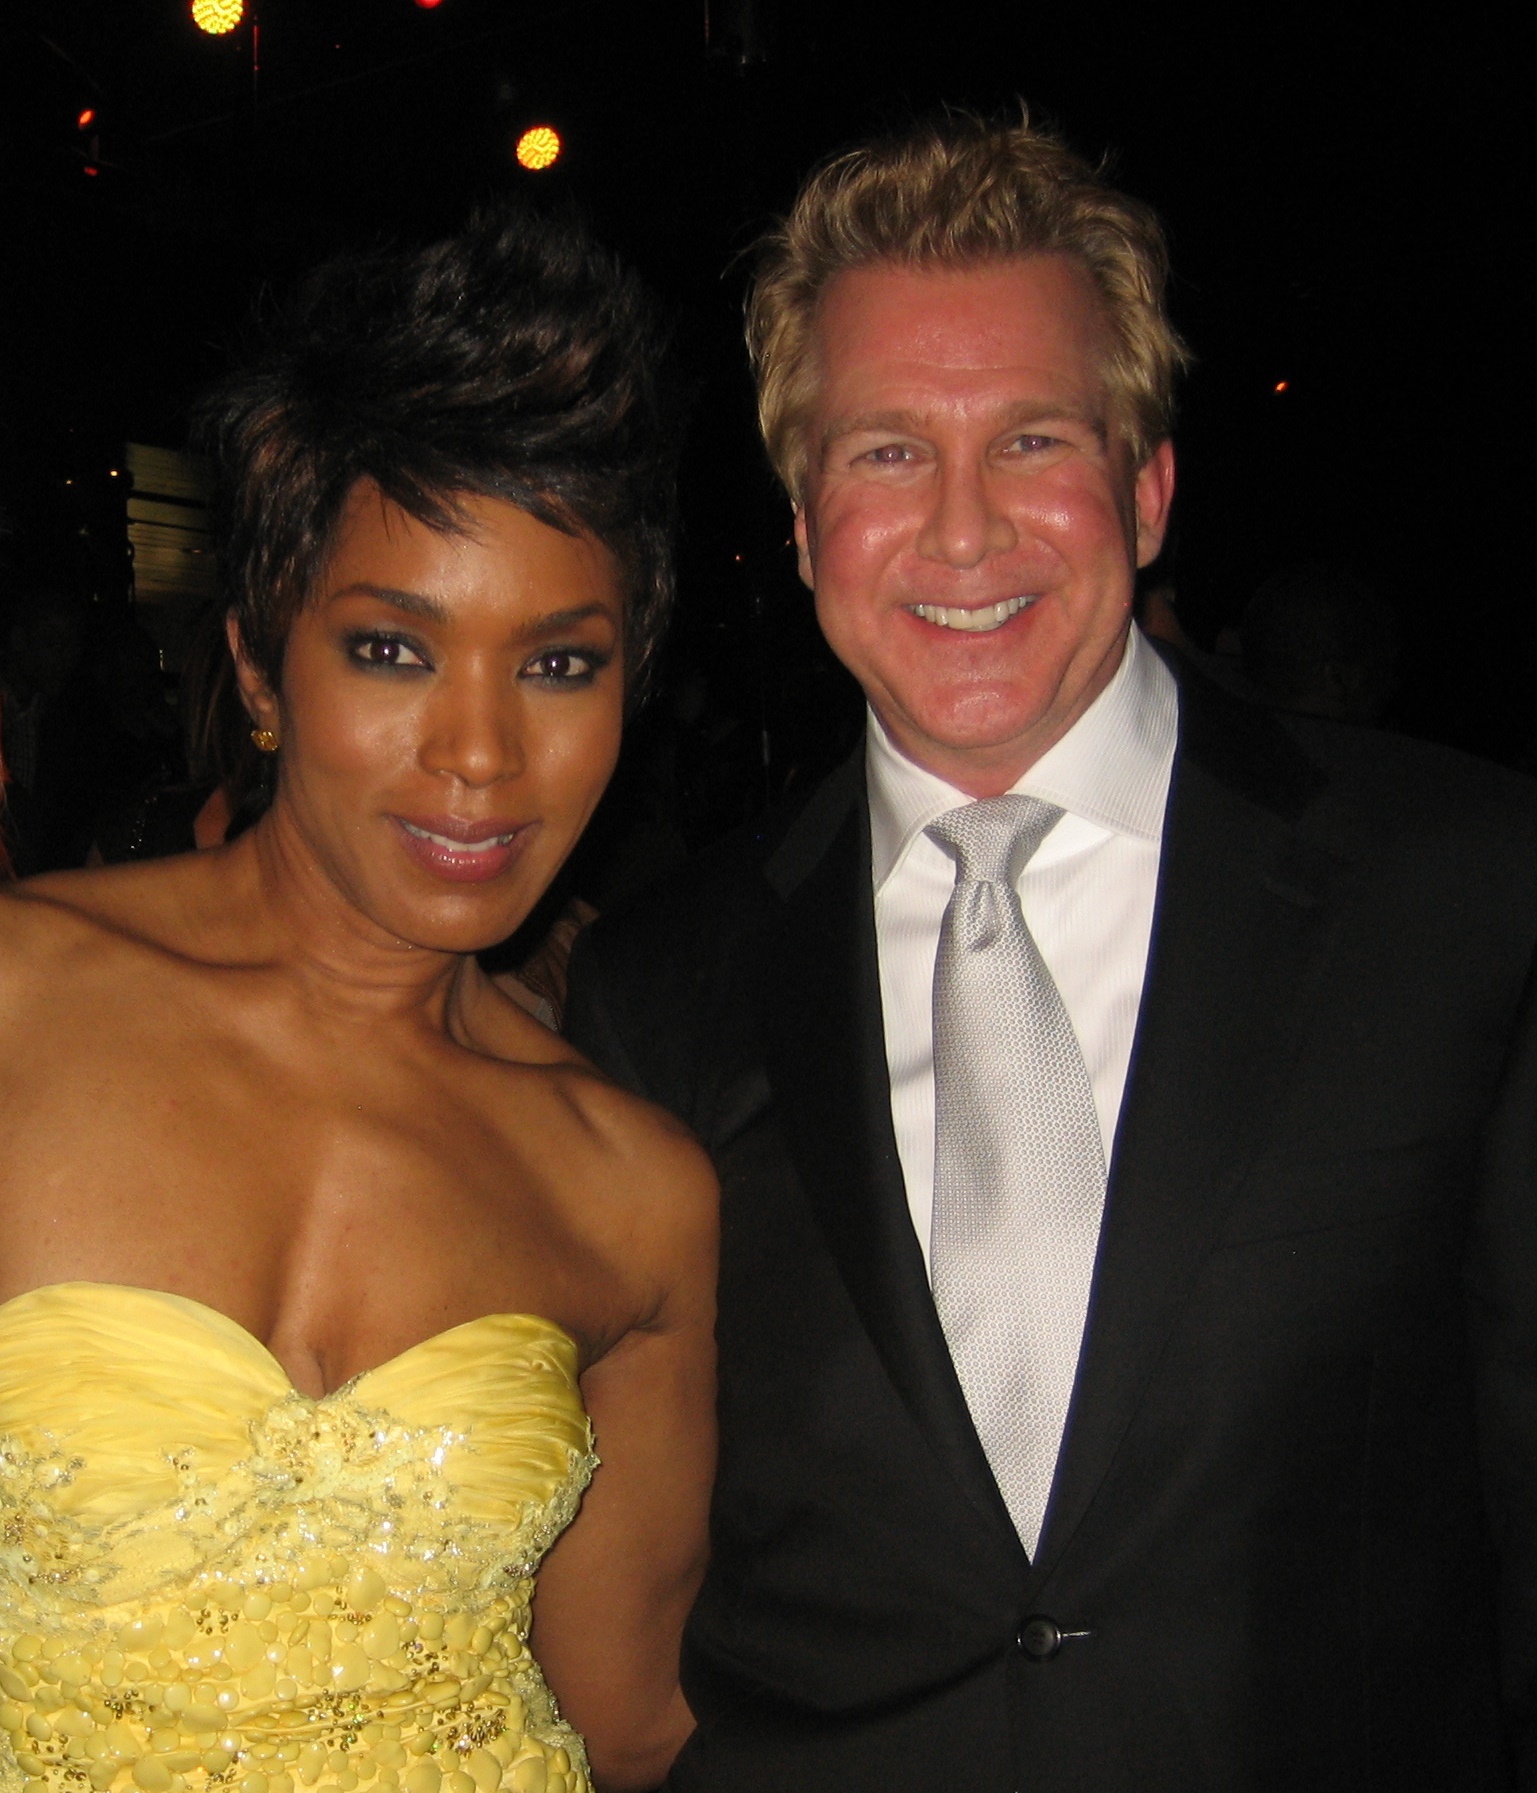 Angela Bassett and Creighton Rothenberger at Olympus Has Fallen premiere - ArcLight Cinemas Cinerama Dome on March 18, 2013 in Hollywood, California.